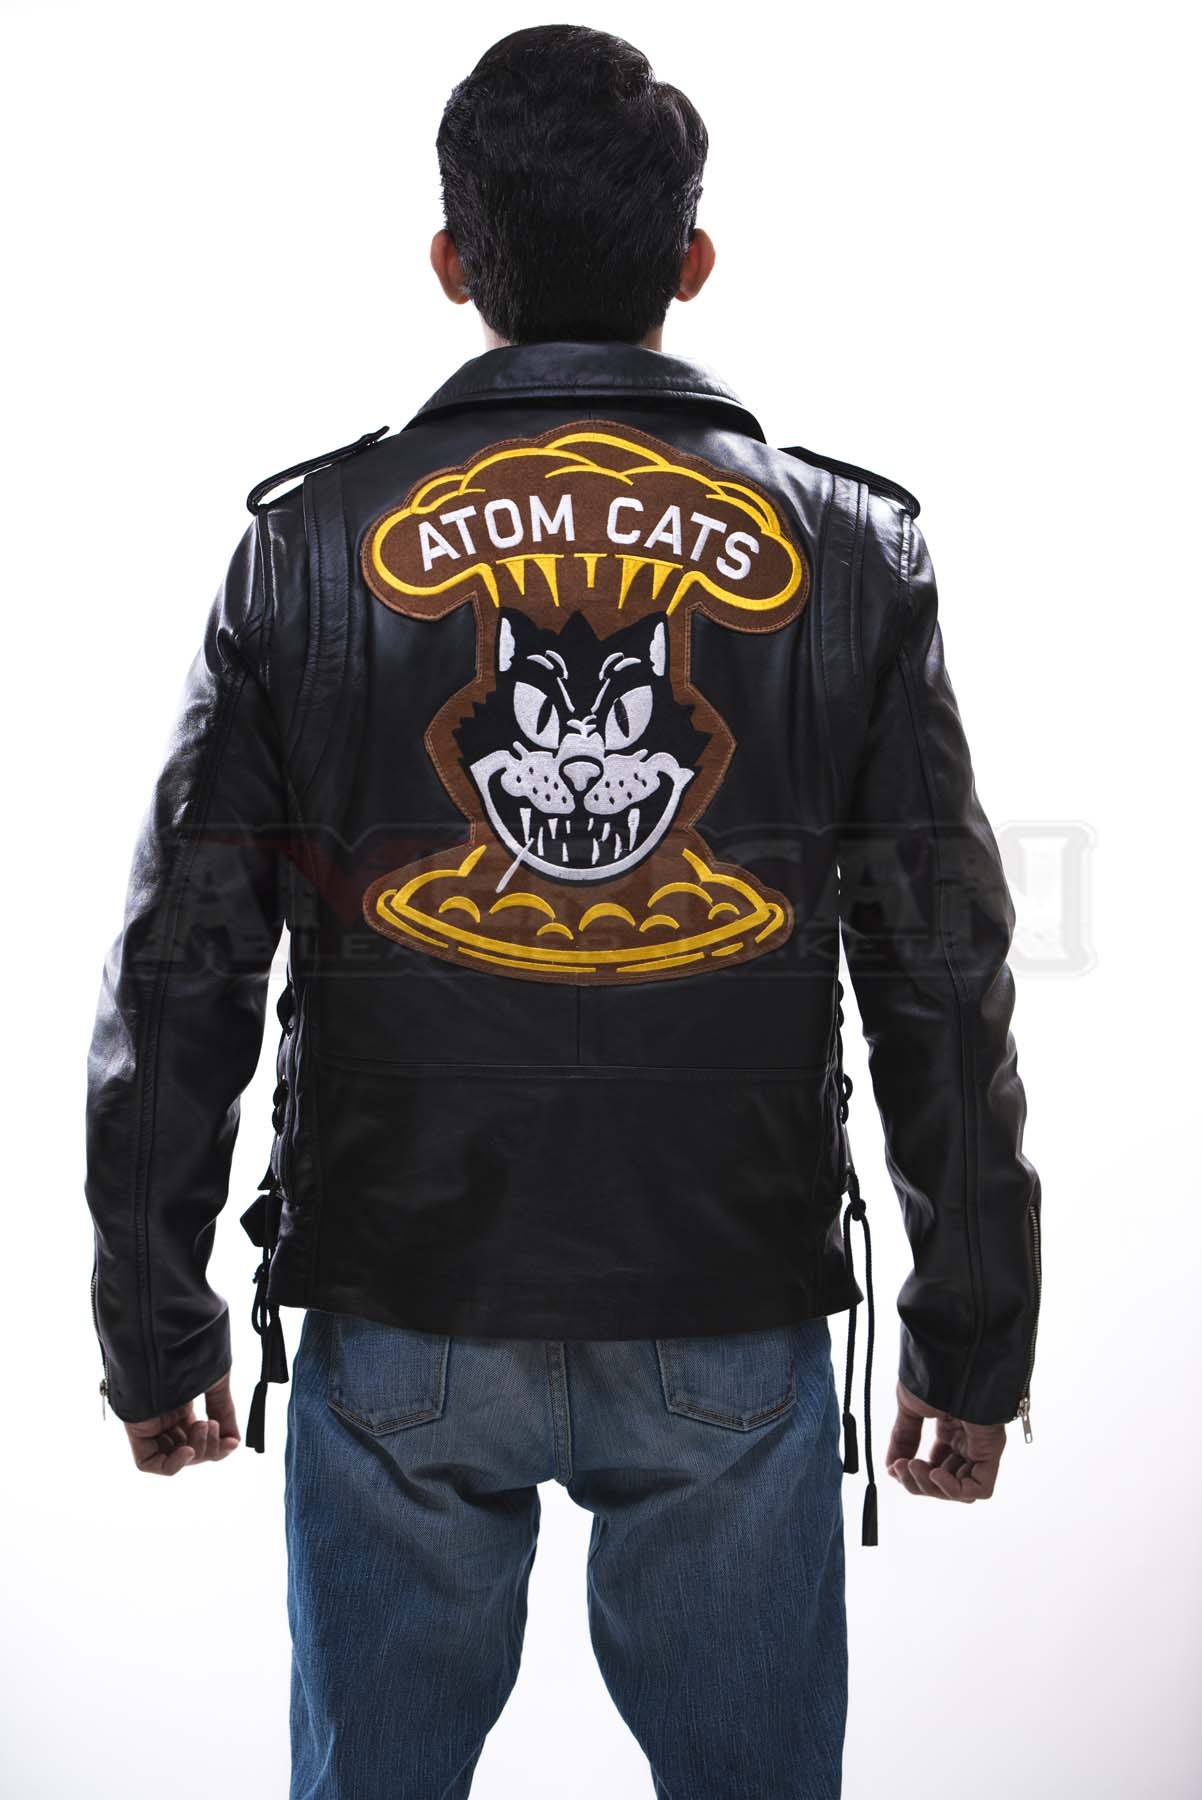 Fallout 4 Atom Cats Leather Jacket For Sale